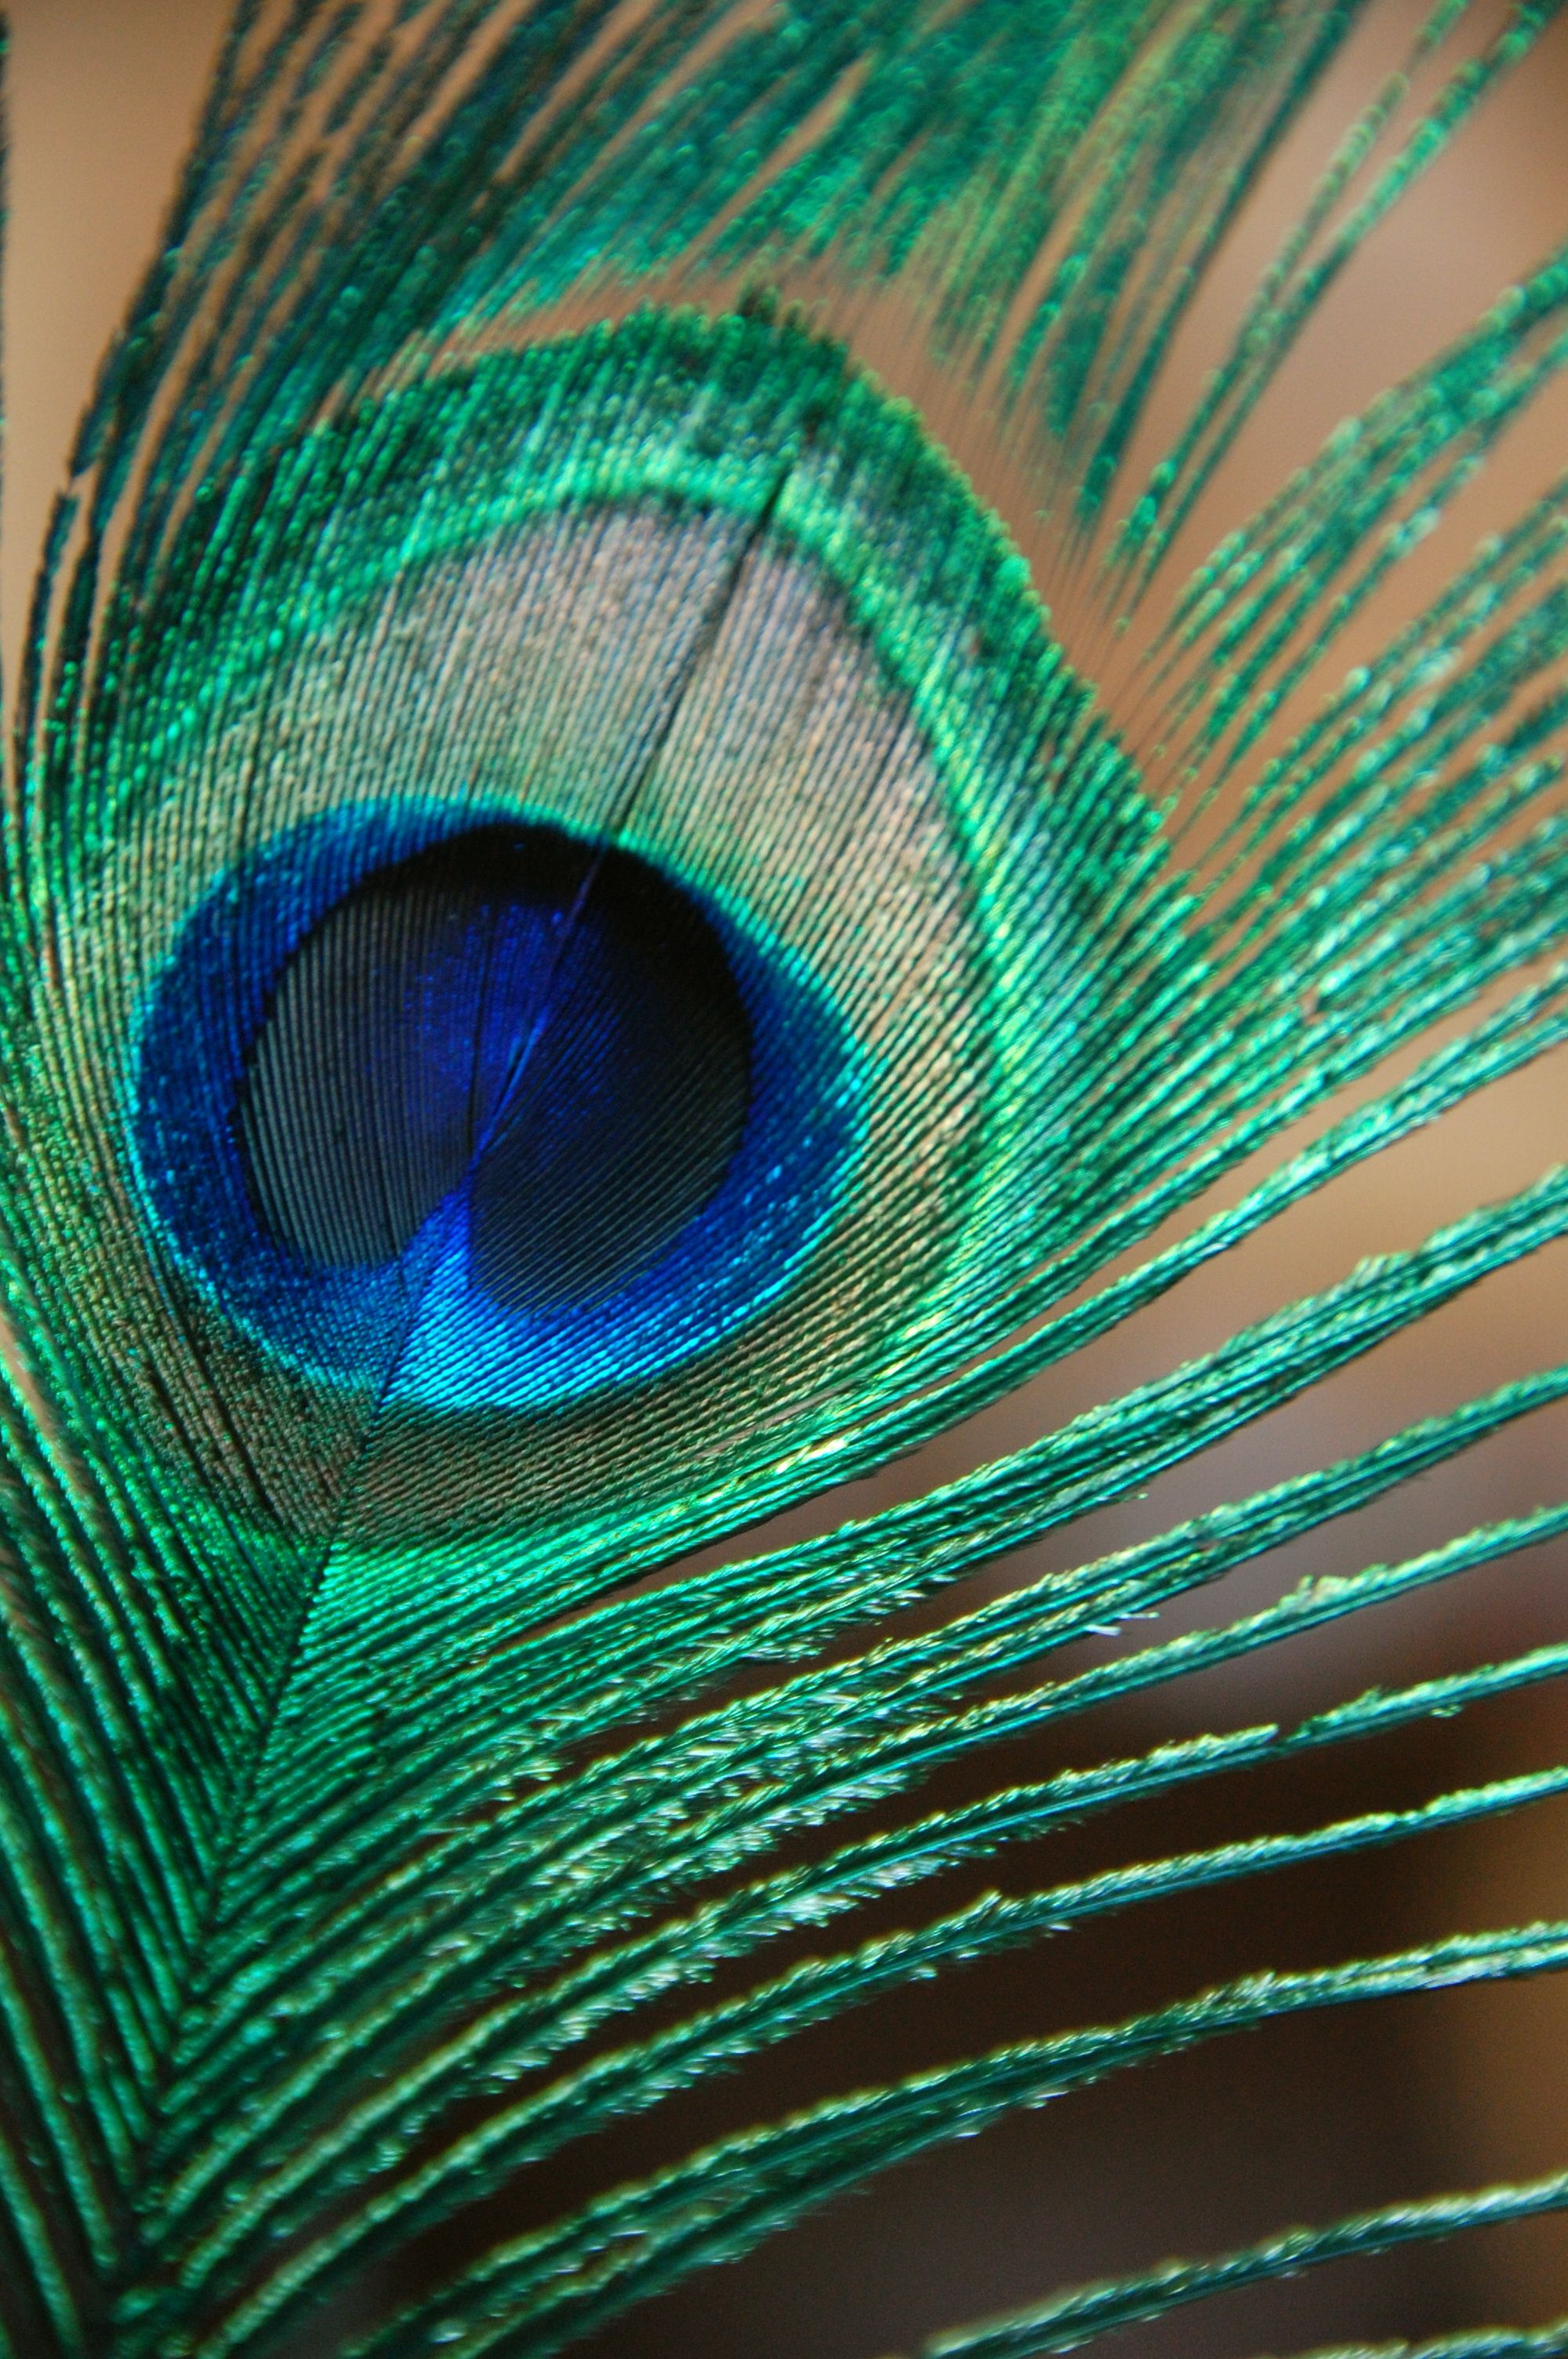 2000x3008 Peacock Feather | Peacock feather art, Peacock wall art, Peacock images